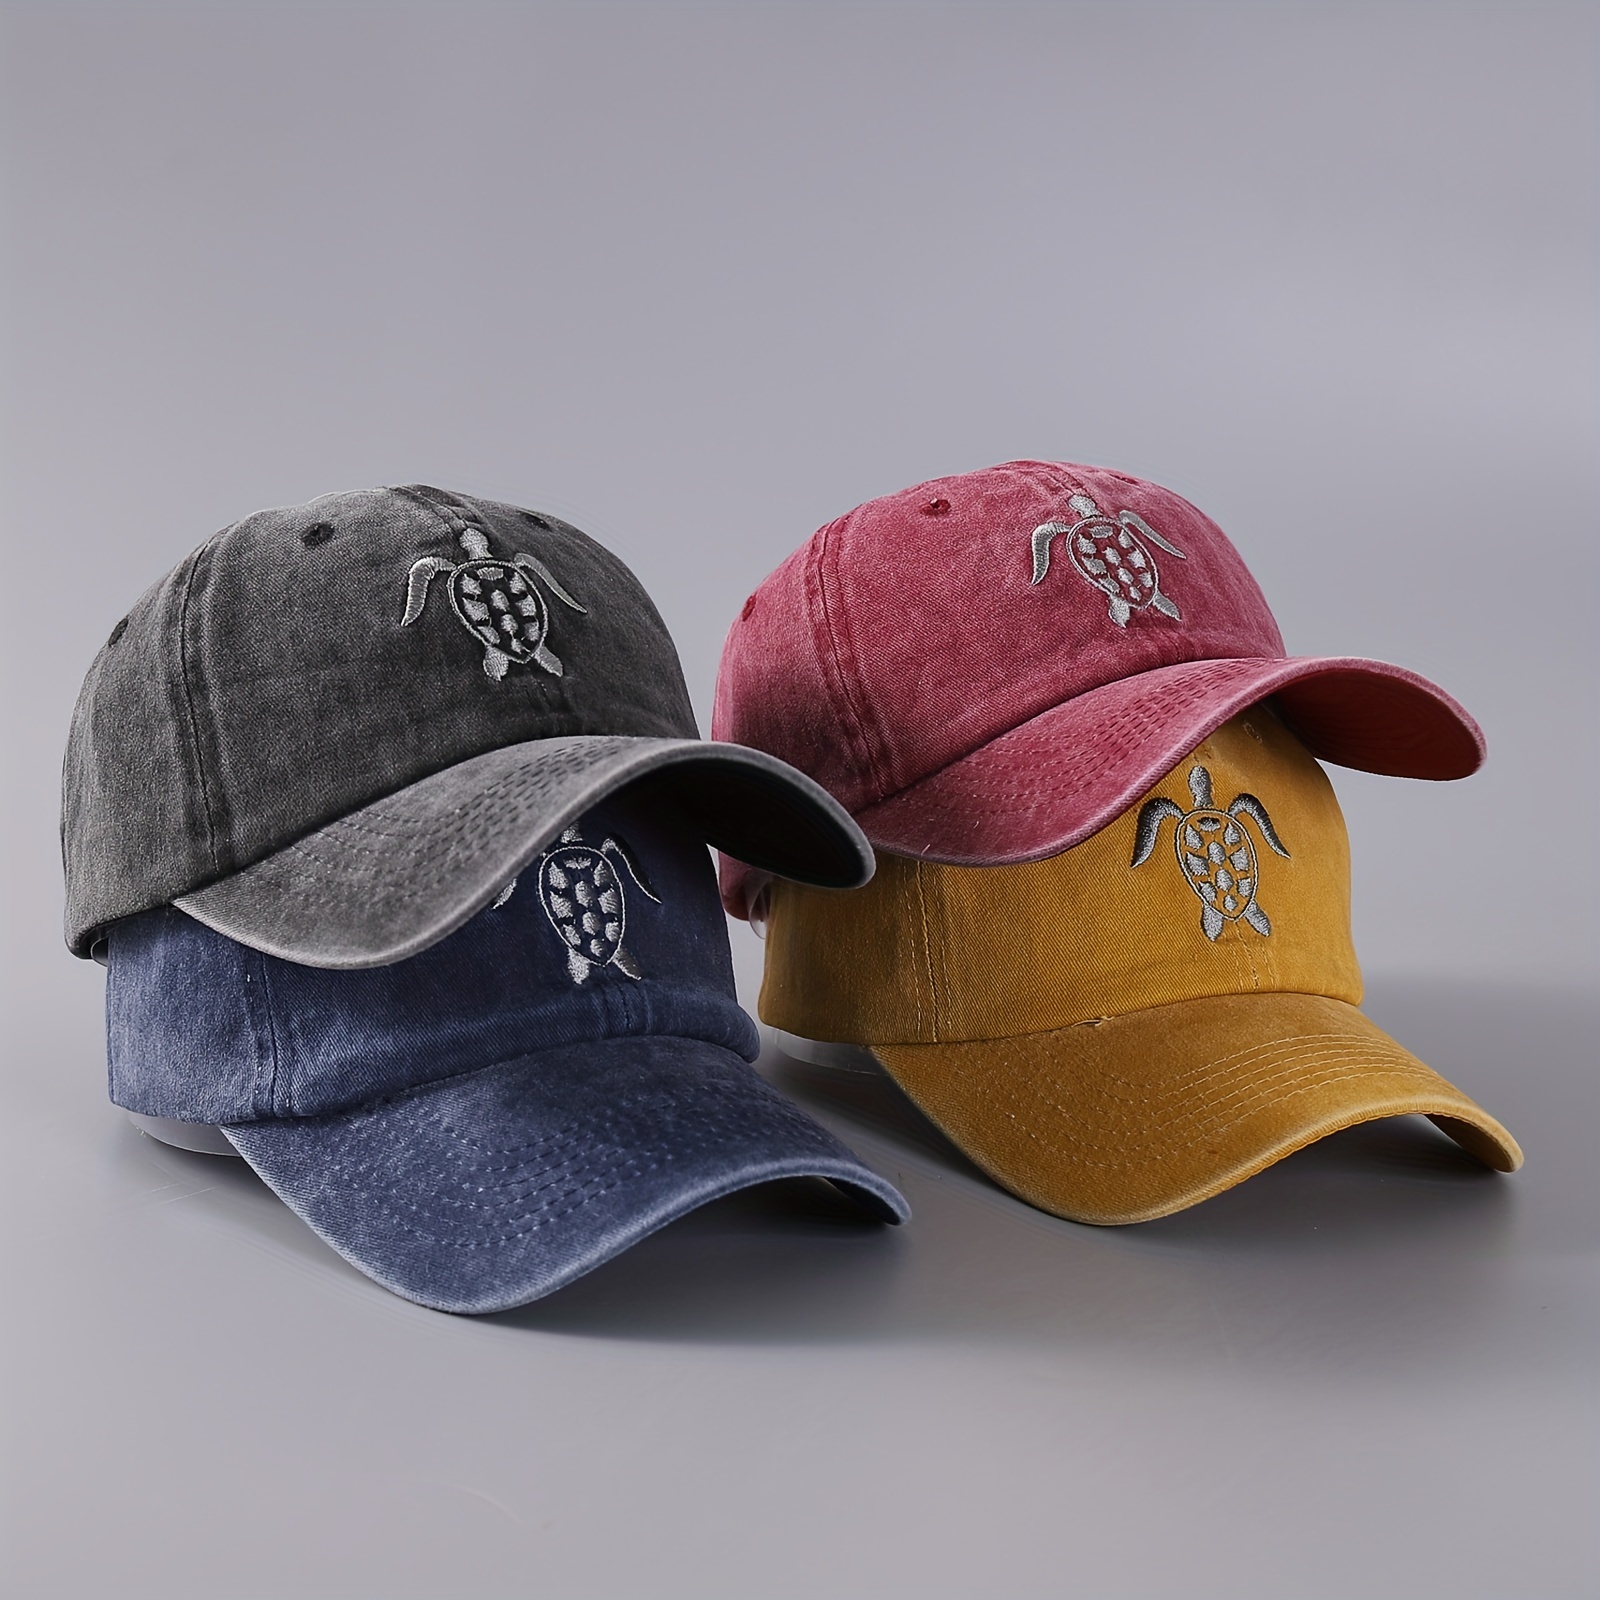 

Soft Top Denim Baseball Cap Men's Vintage Washed 1 Will Fly Turtle Cool Curved Brim Peaked Cap, Ideal Choice For Gifts